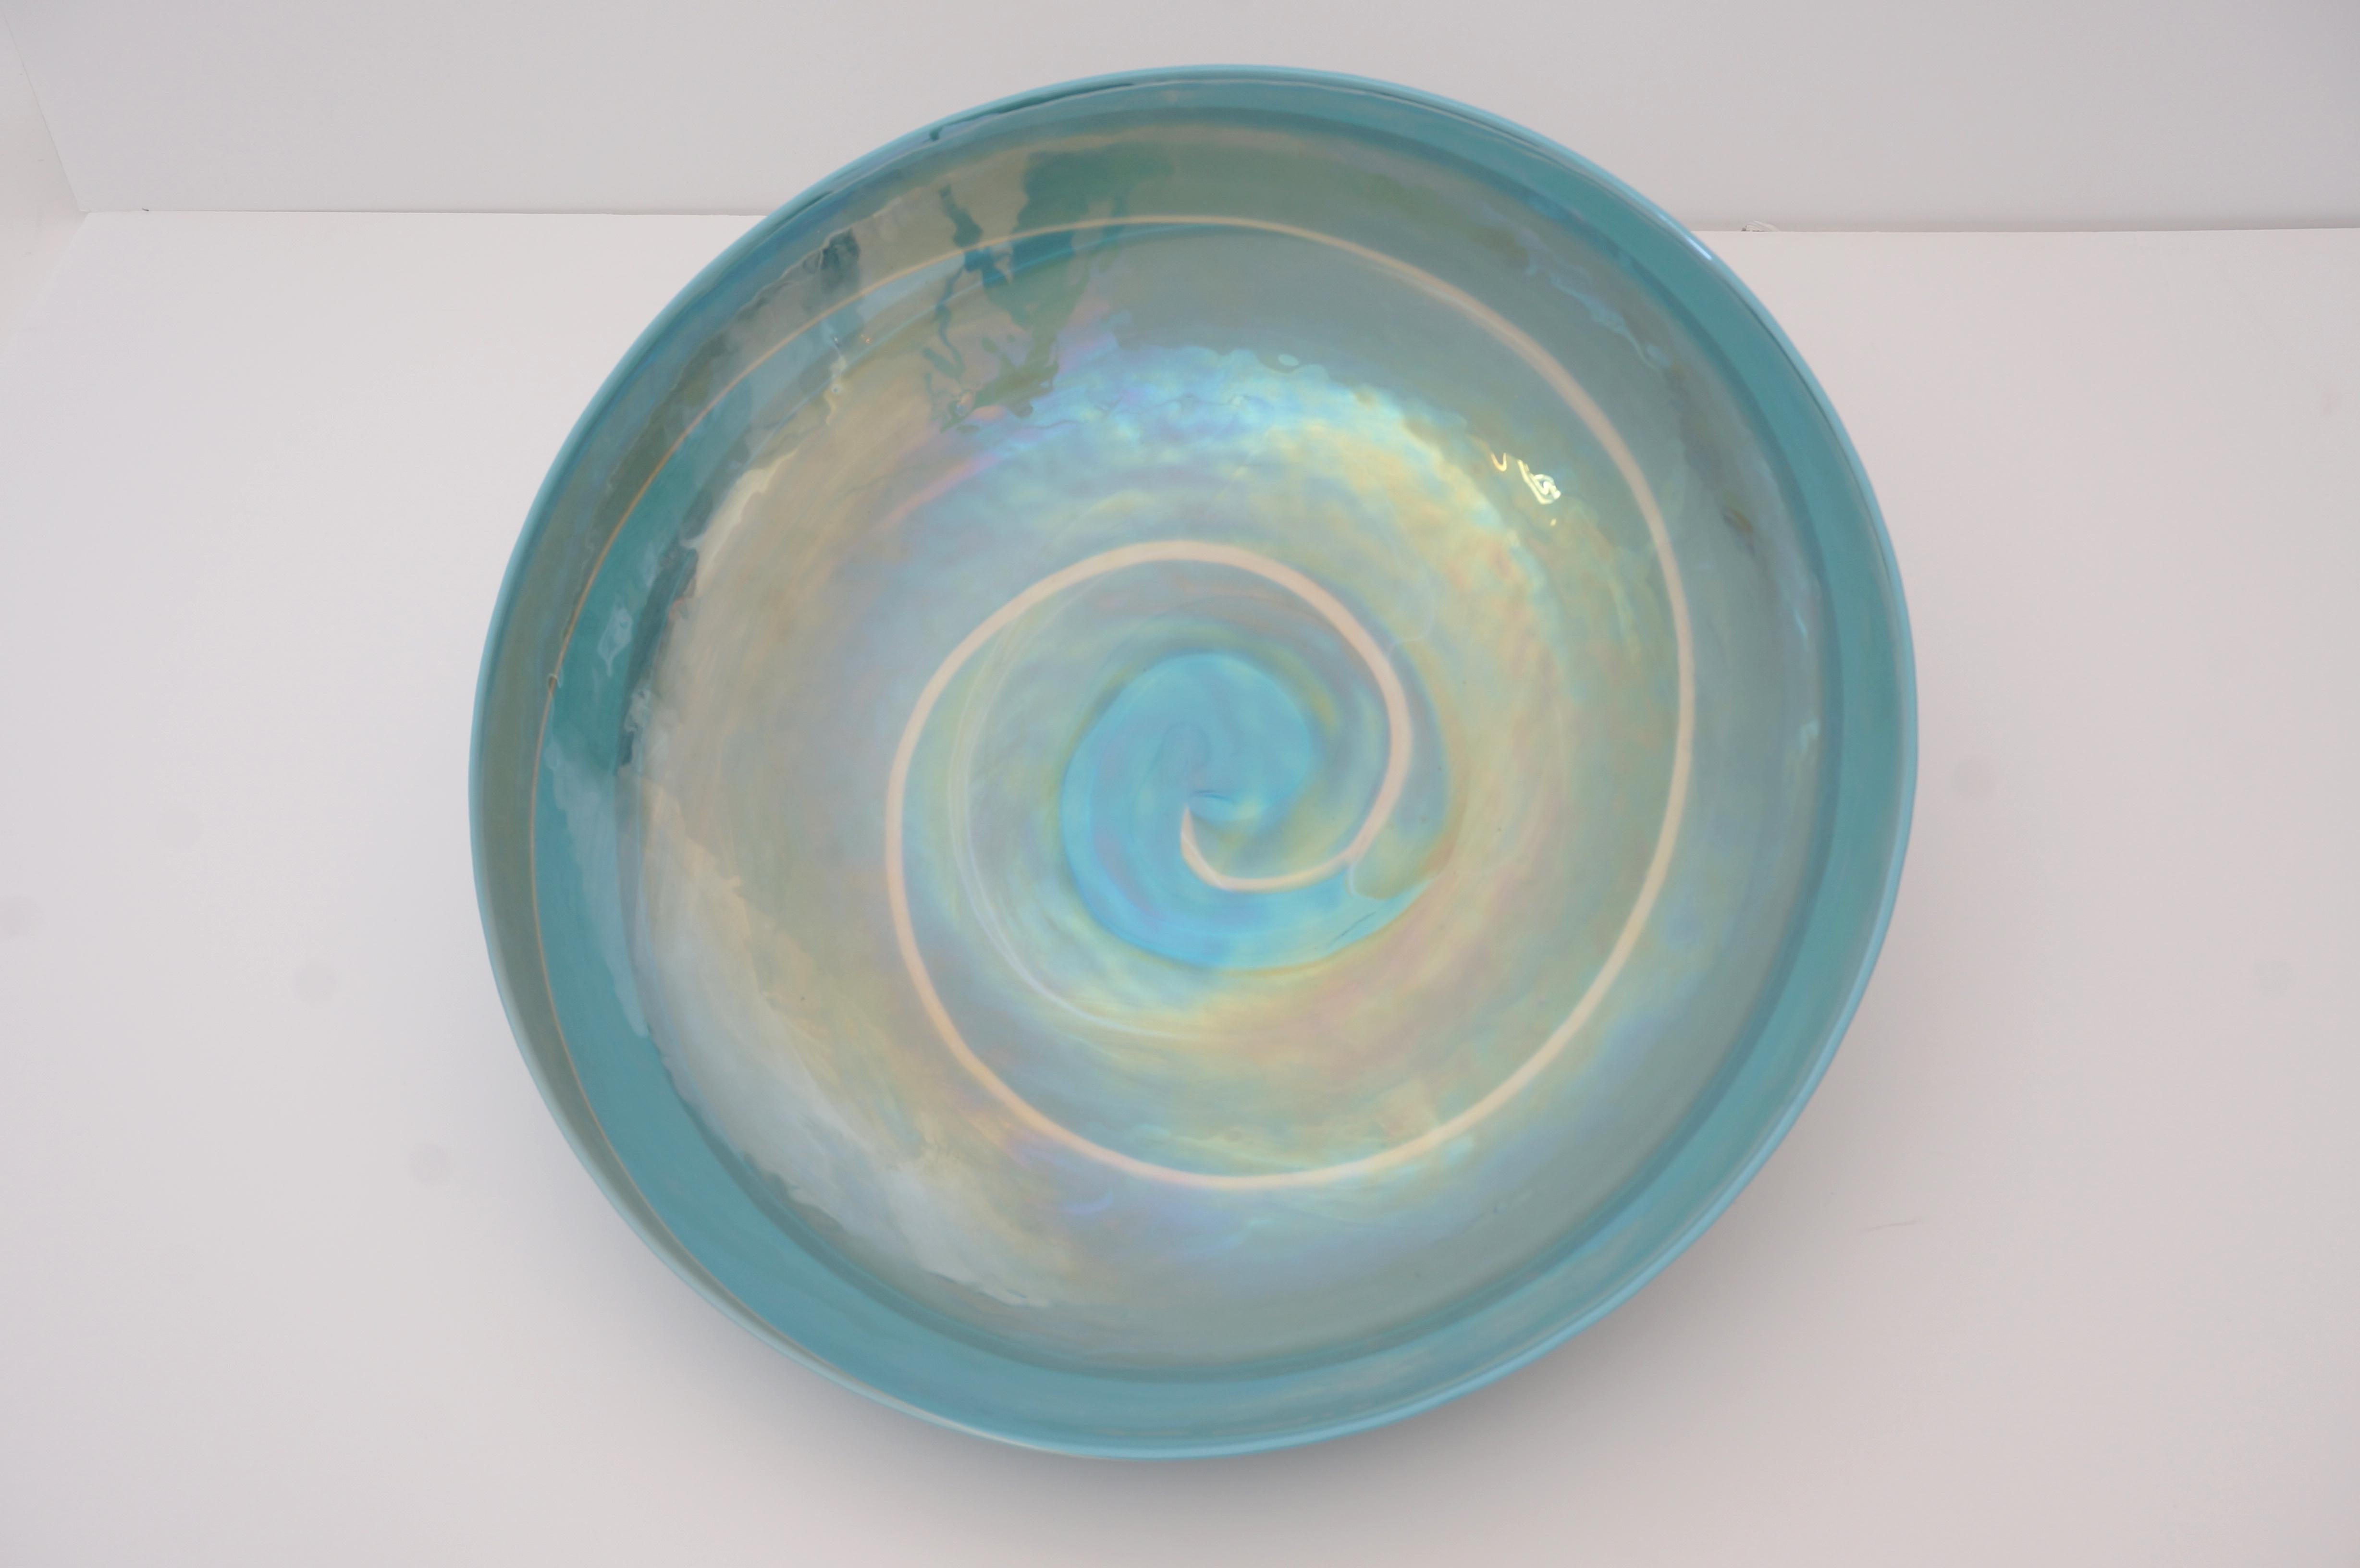 This stylish and chic Murano glass bowl will can be used on its own as an object of beauty or perhaps to hold fresh fruits, or even as a salad bowl.

Note: The piece is signed on the verso Yalos Casa Murano (see image).